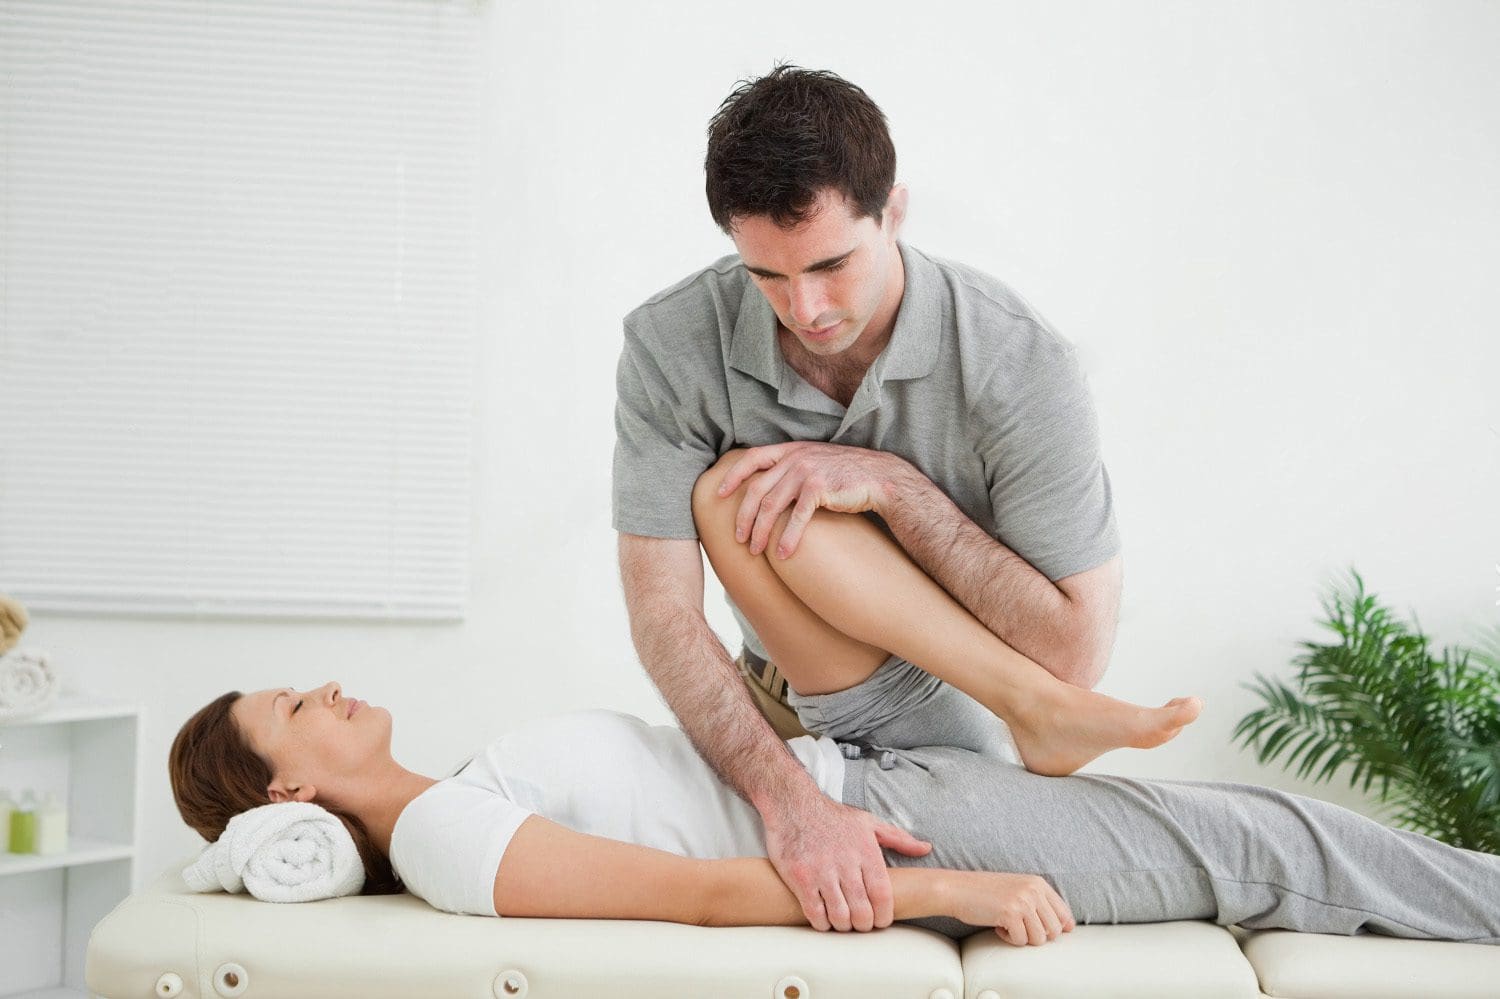 stock photo brown haired woman being stretched by a man in a room